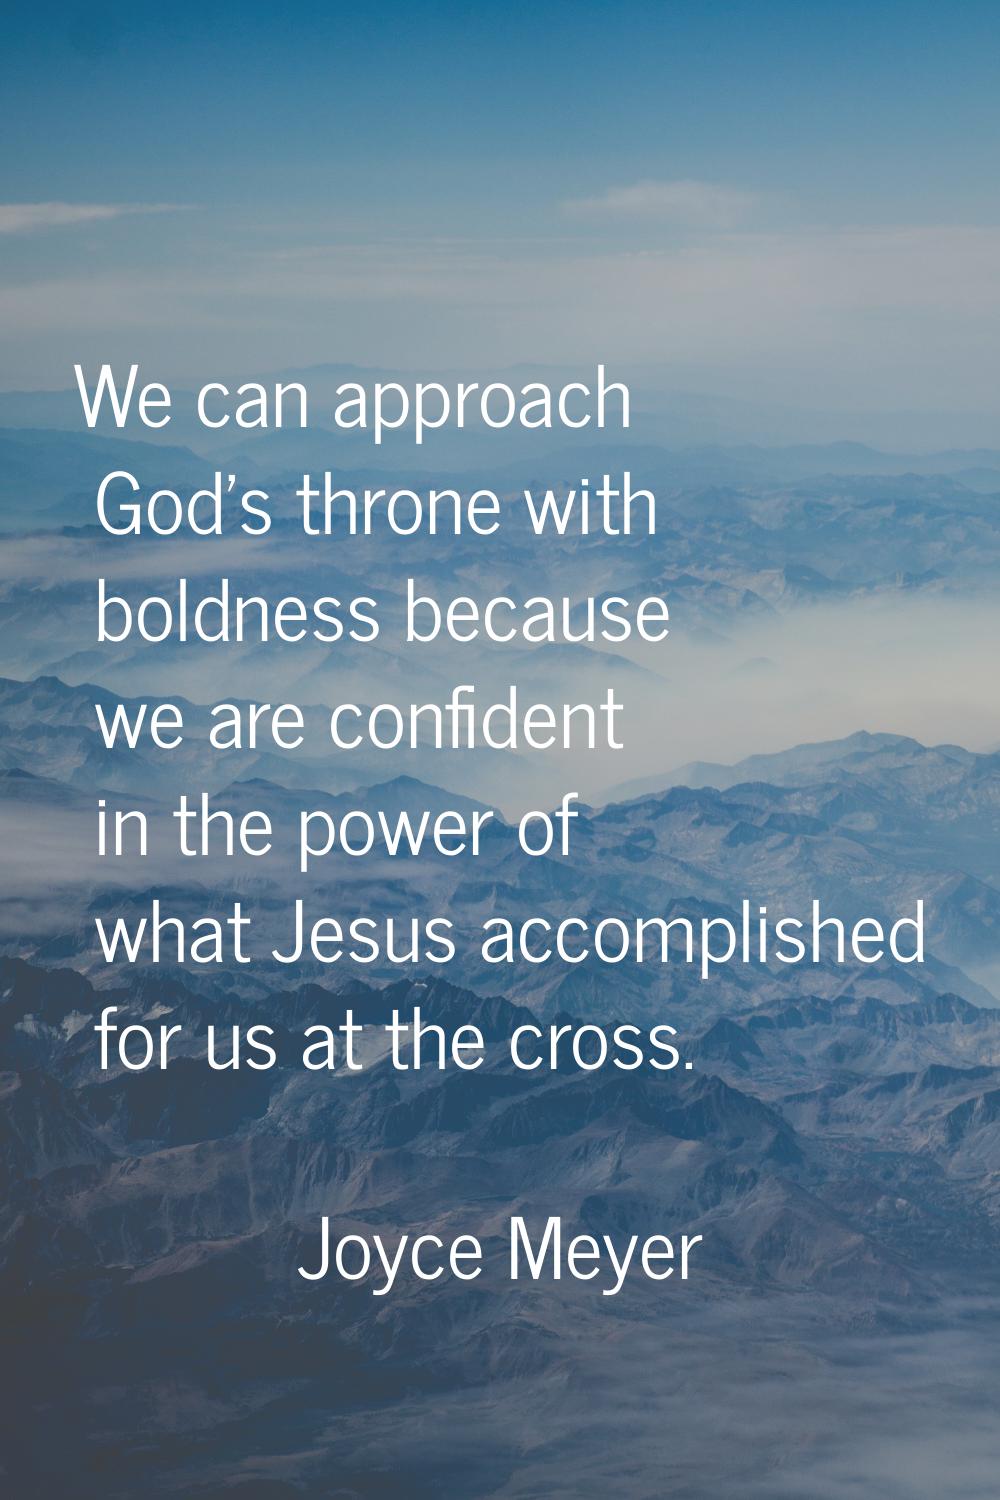 We can approach God's throne with boldness because we are confident in the power of what Jesus acco